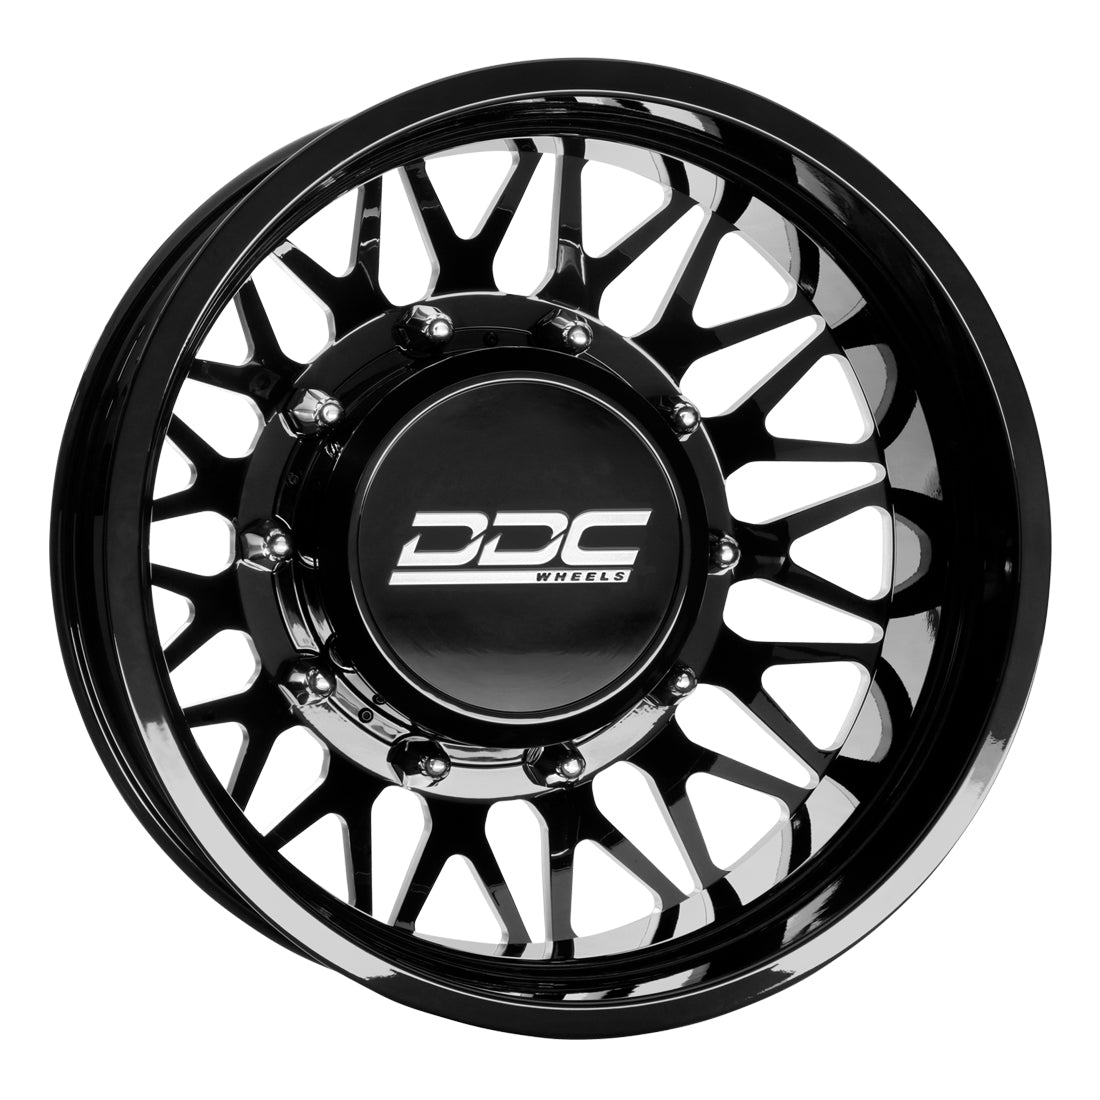 The Mesh Black Milled Open Country A/TIII 285/55R22 (34.4 x 11.7)